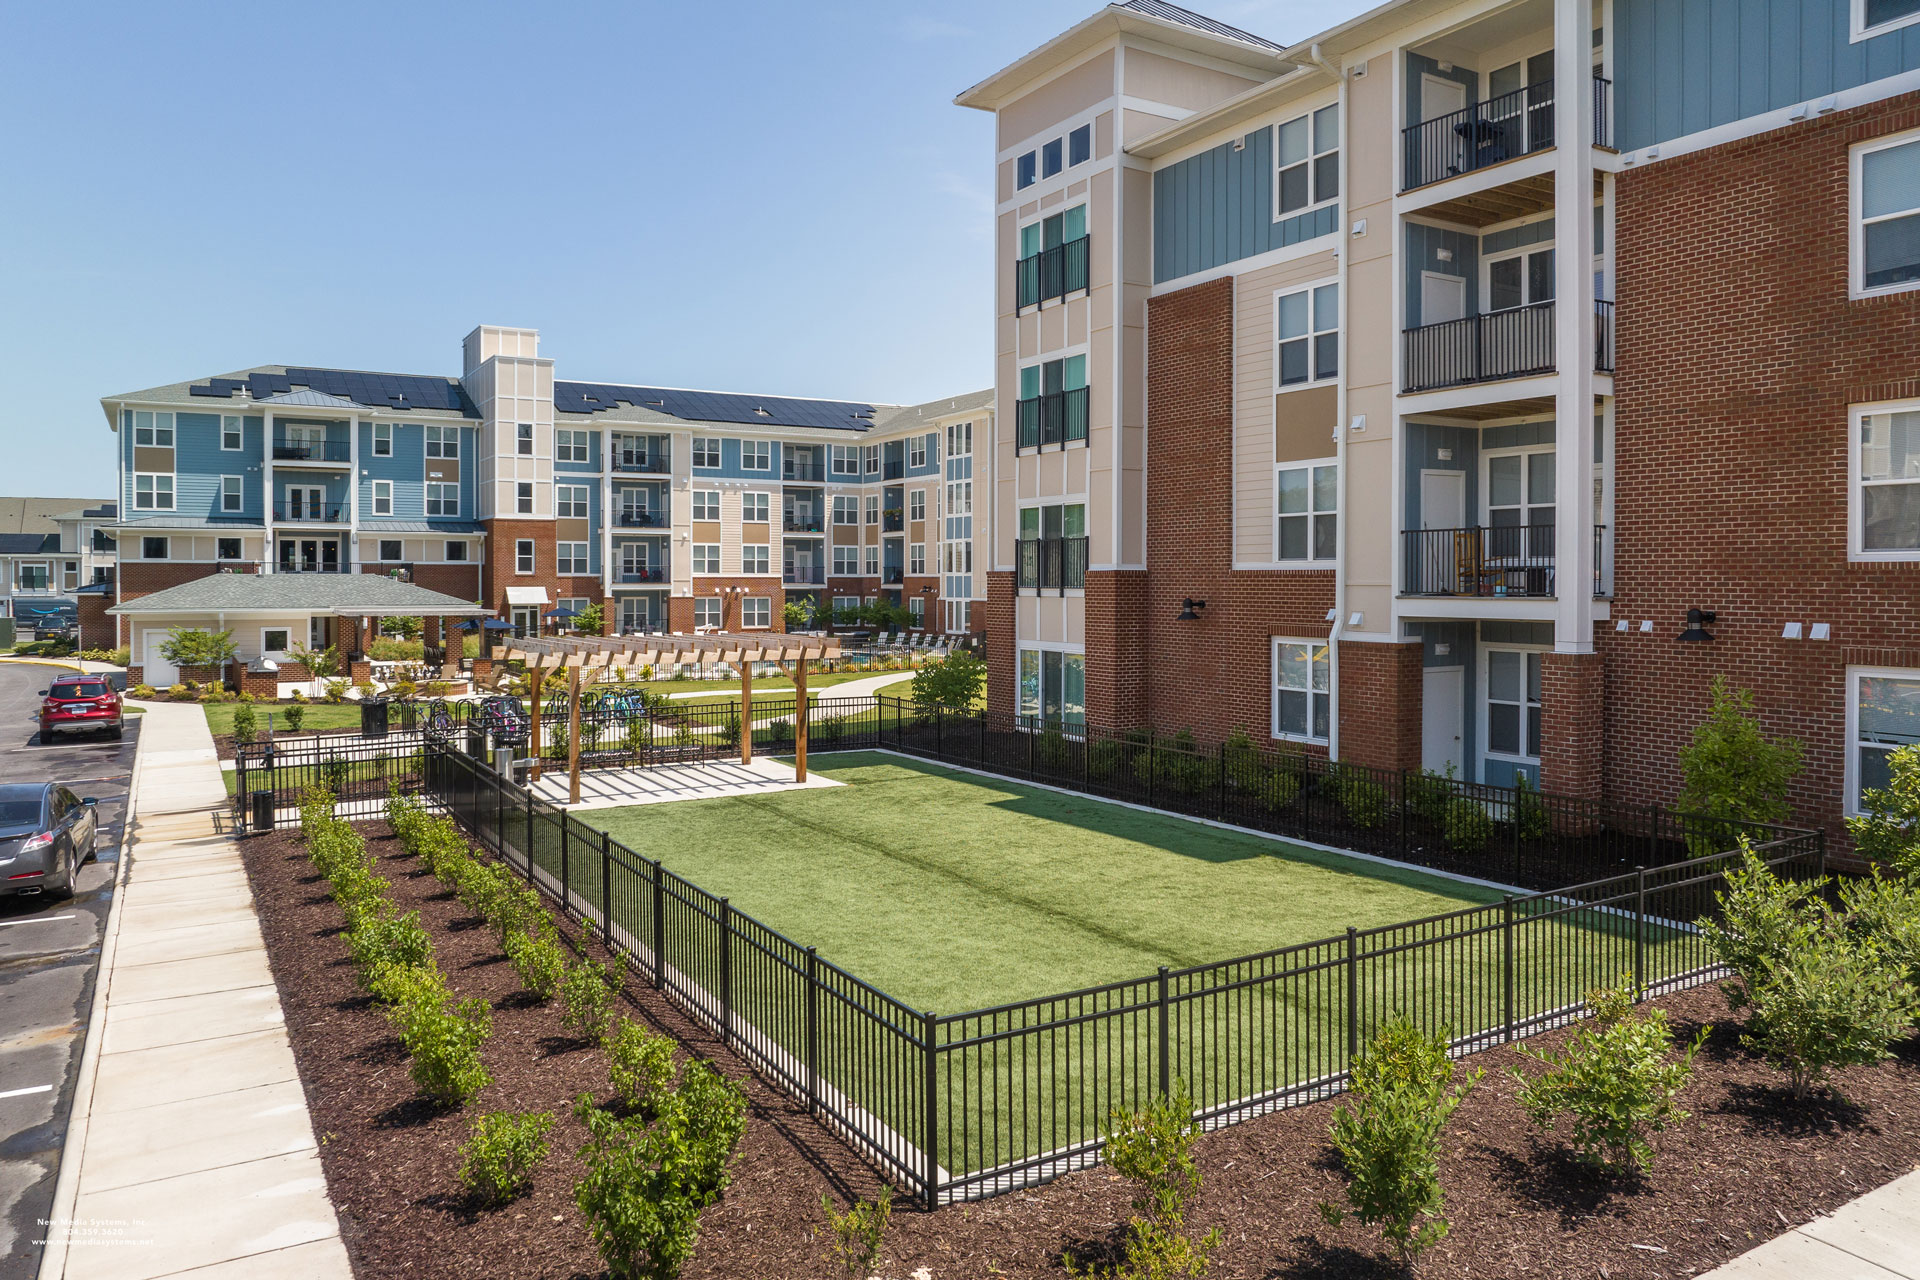 Photo of a flowerbed and fences grassy area with the exterior of the multifamily complex